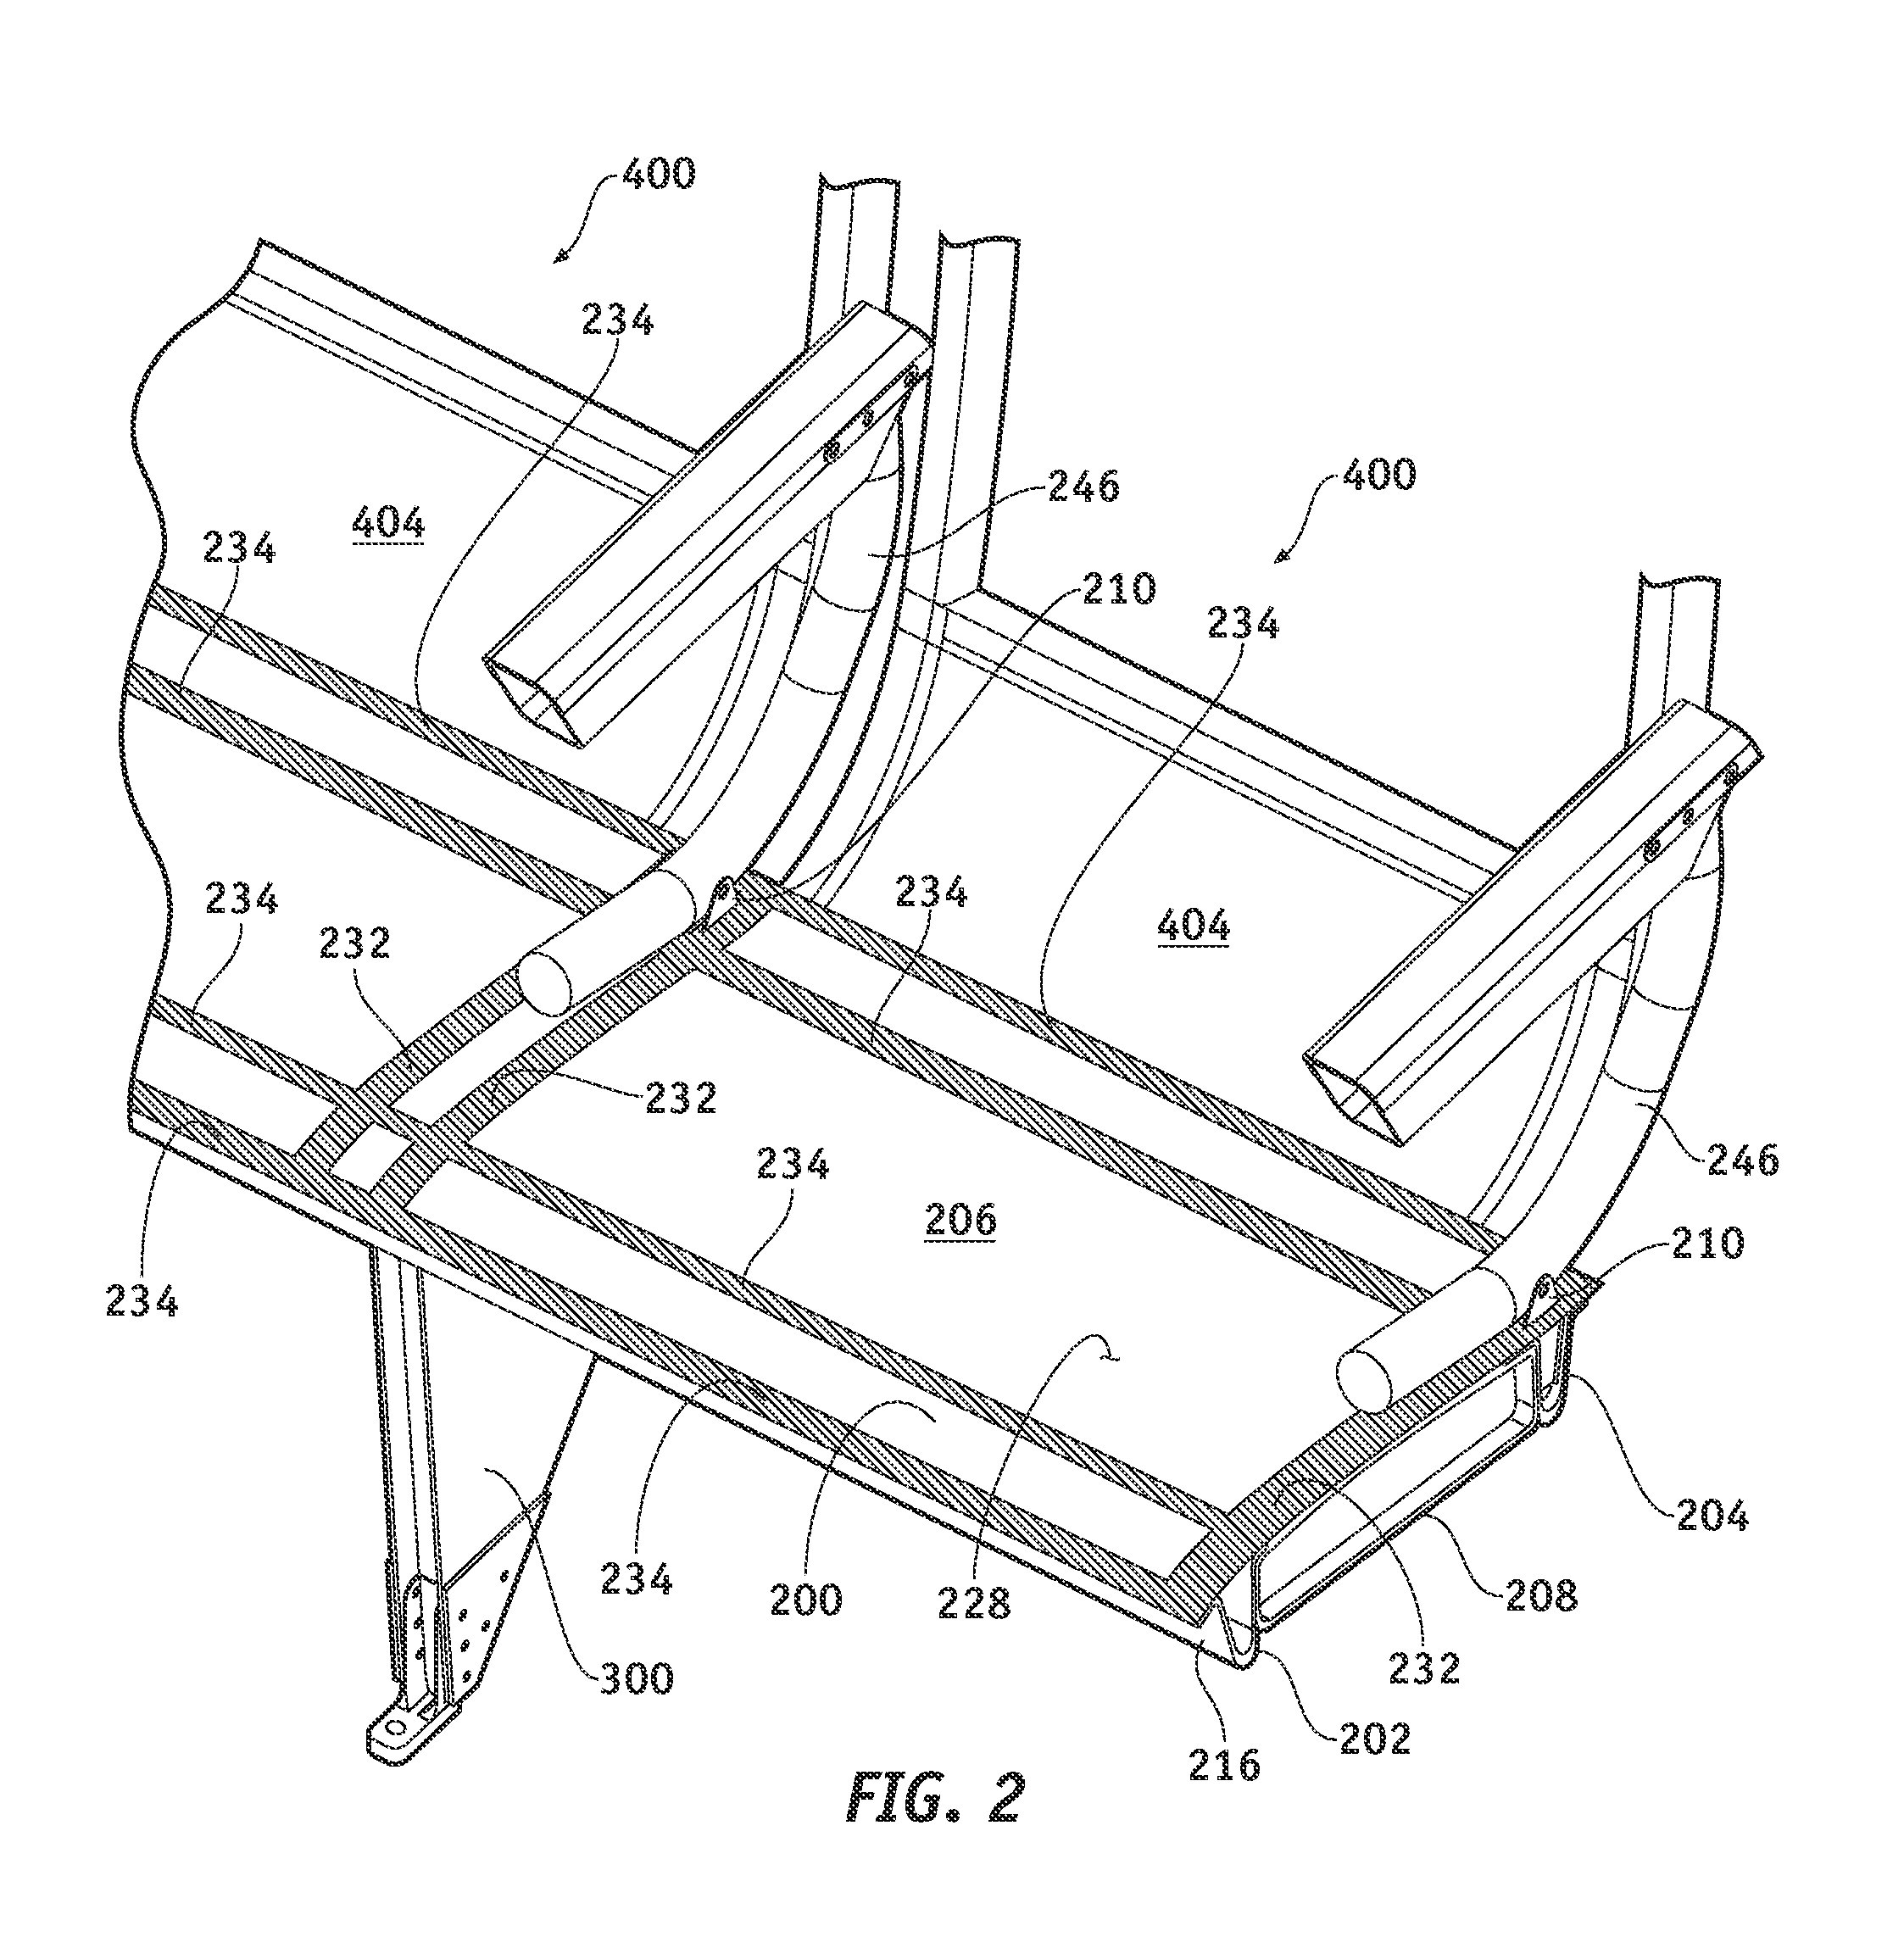 Composite seat pan structure for a lightweight aircraft seat assembly